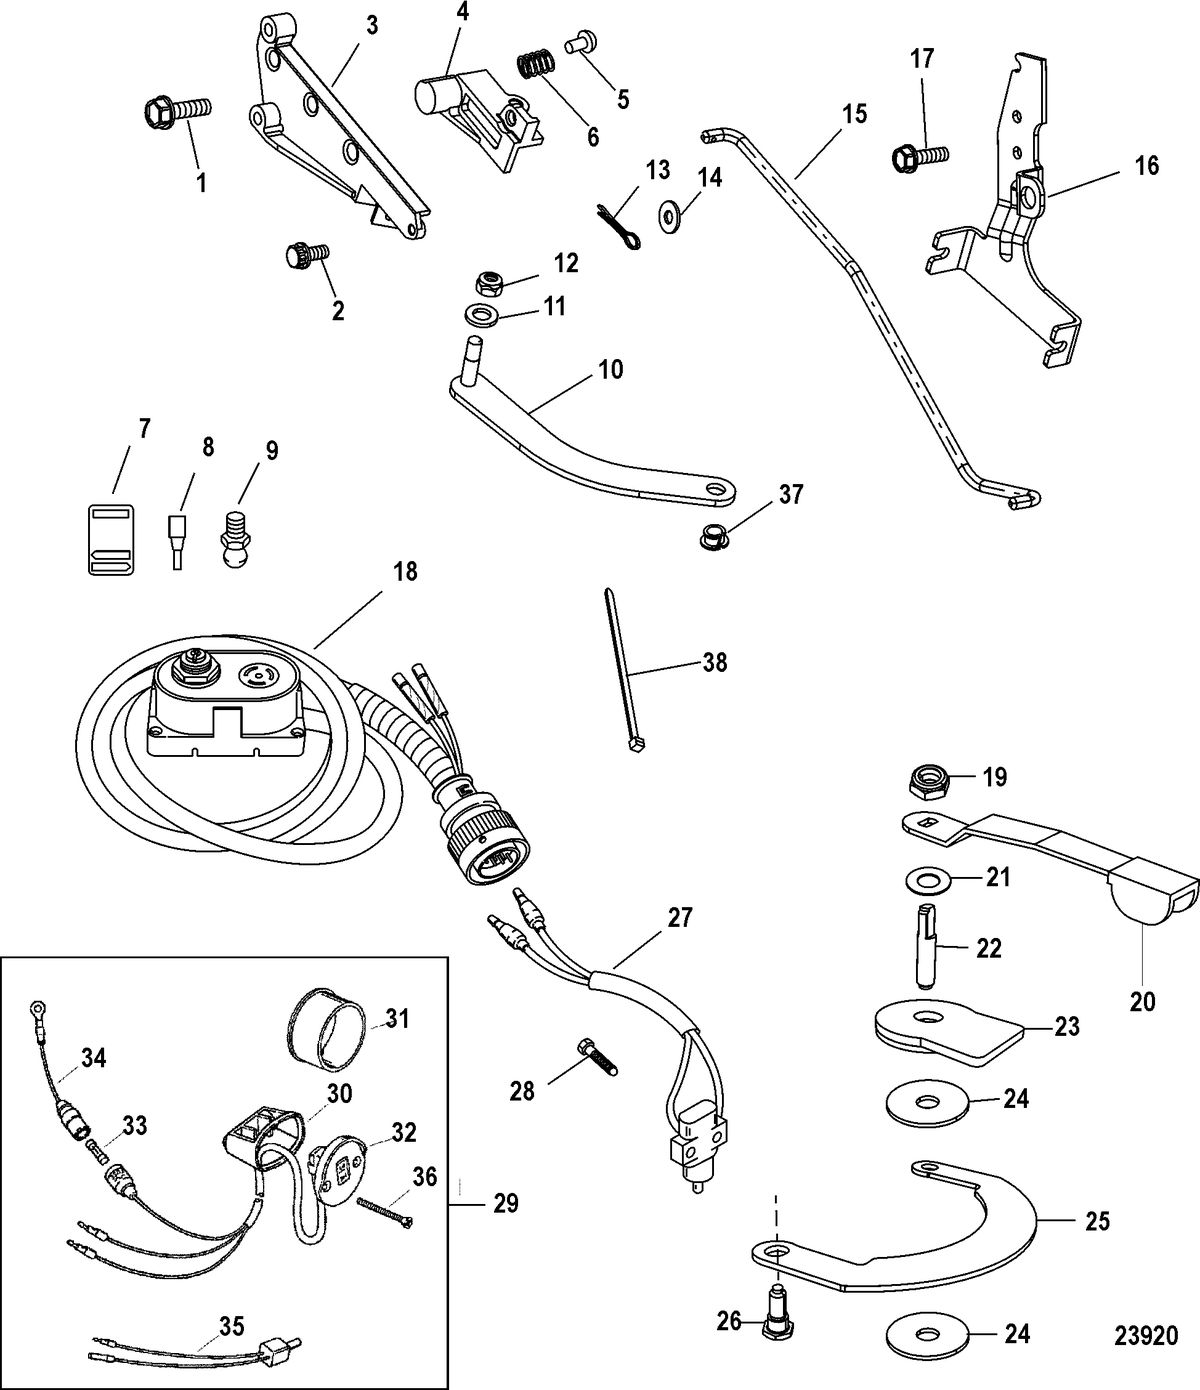 ACCESSORIES STEERING SYSTEMS AND COMPONENTS Tiller Handle Kit Components(821455A15 / A24)